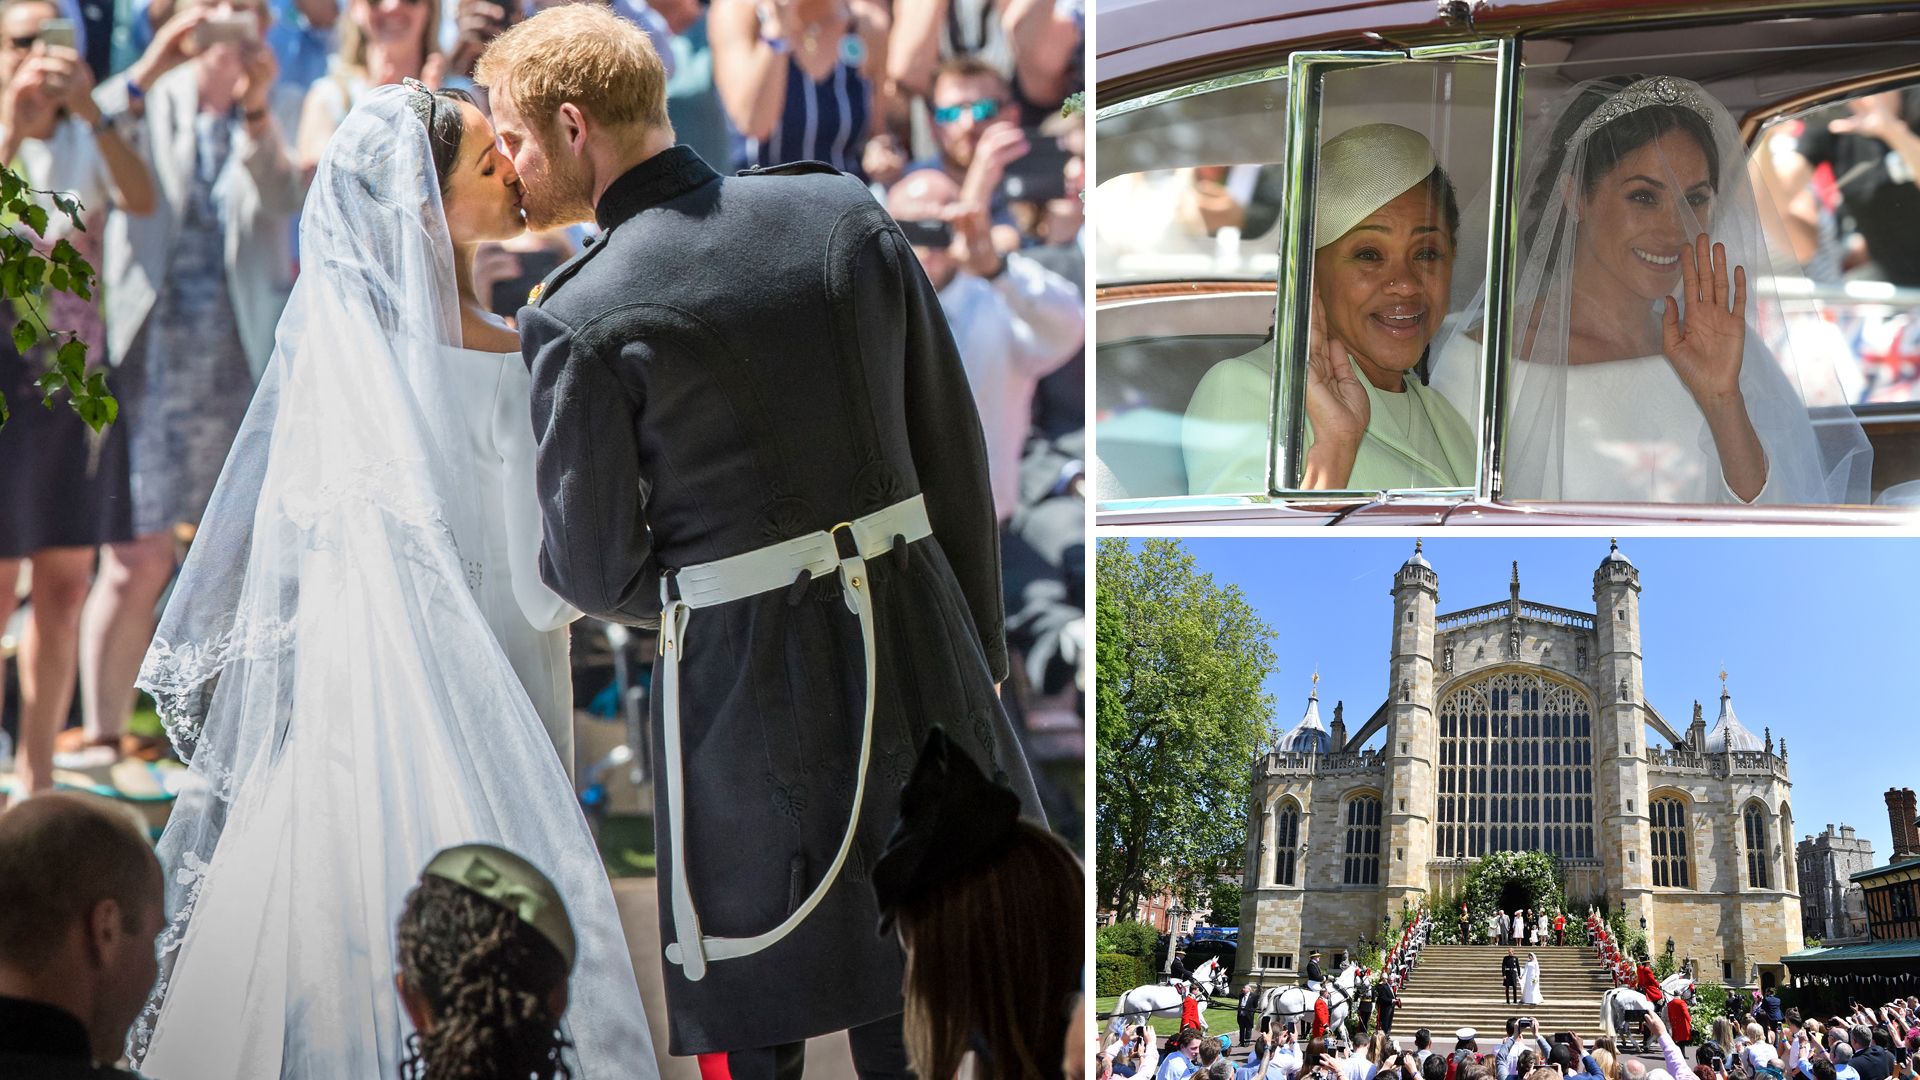 Meghan Markle kissing Prince Harry, in the car with her mother Doria Ragland and exiting her ceremony at St George's Chapel